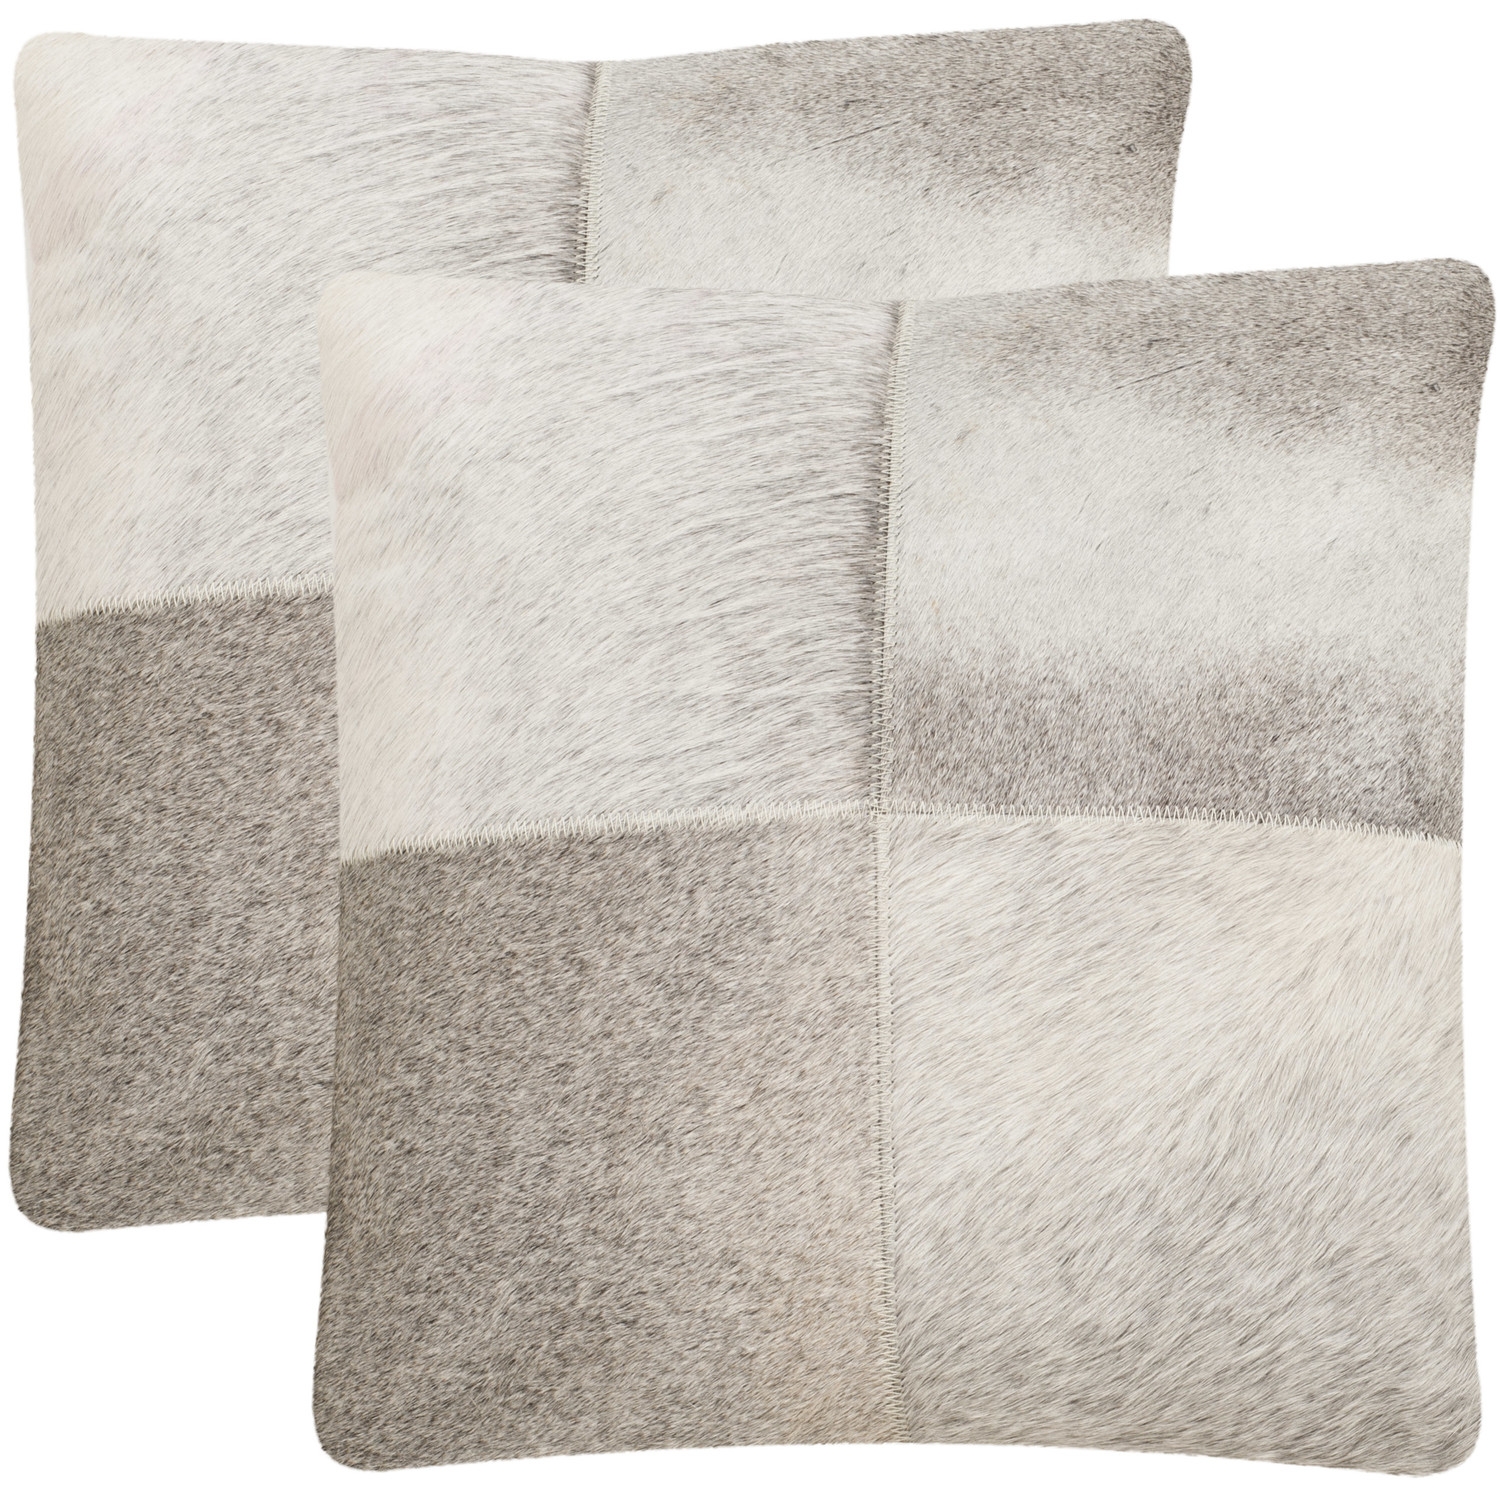 Modern Cowhide Pillow - Image 0